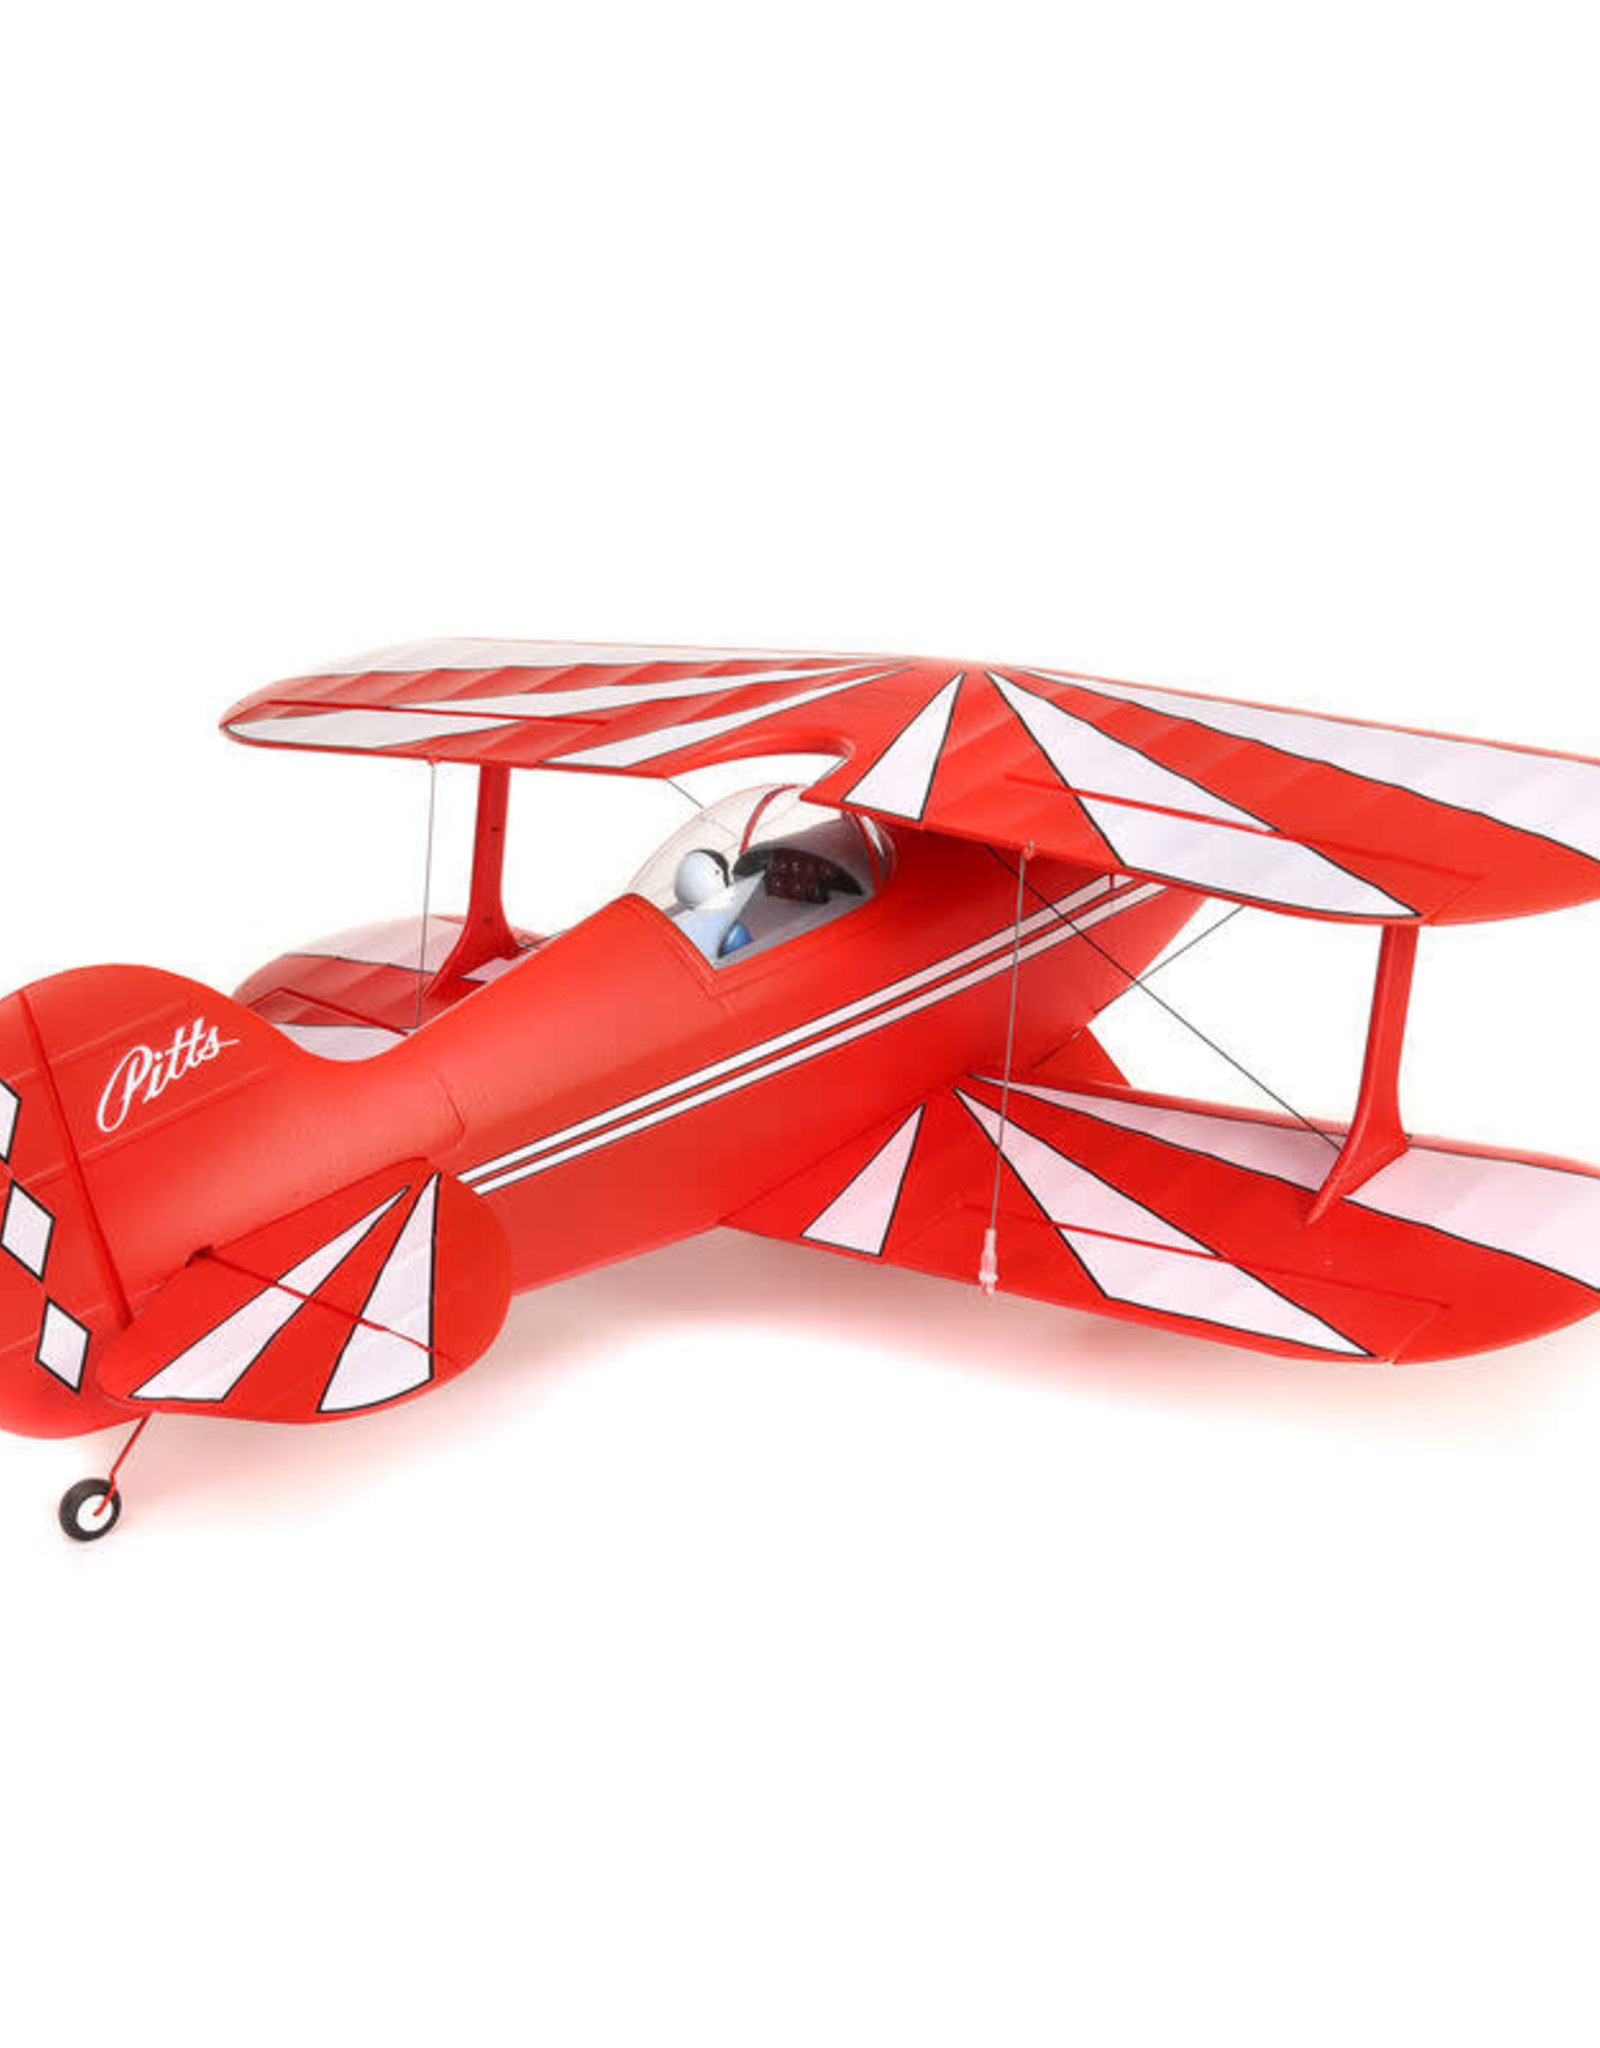 eflite EFL35500  Pitts S-1S BNF Basic with AS3X and SAFE Select, 850mm